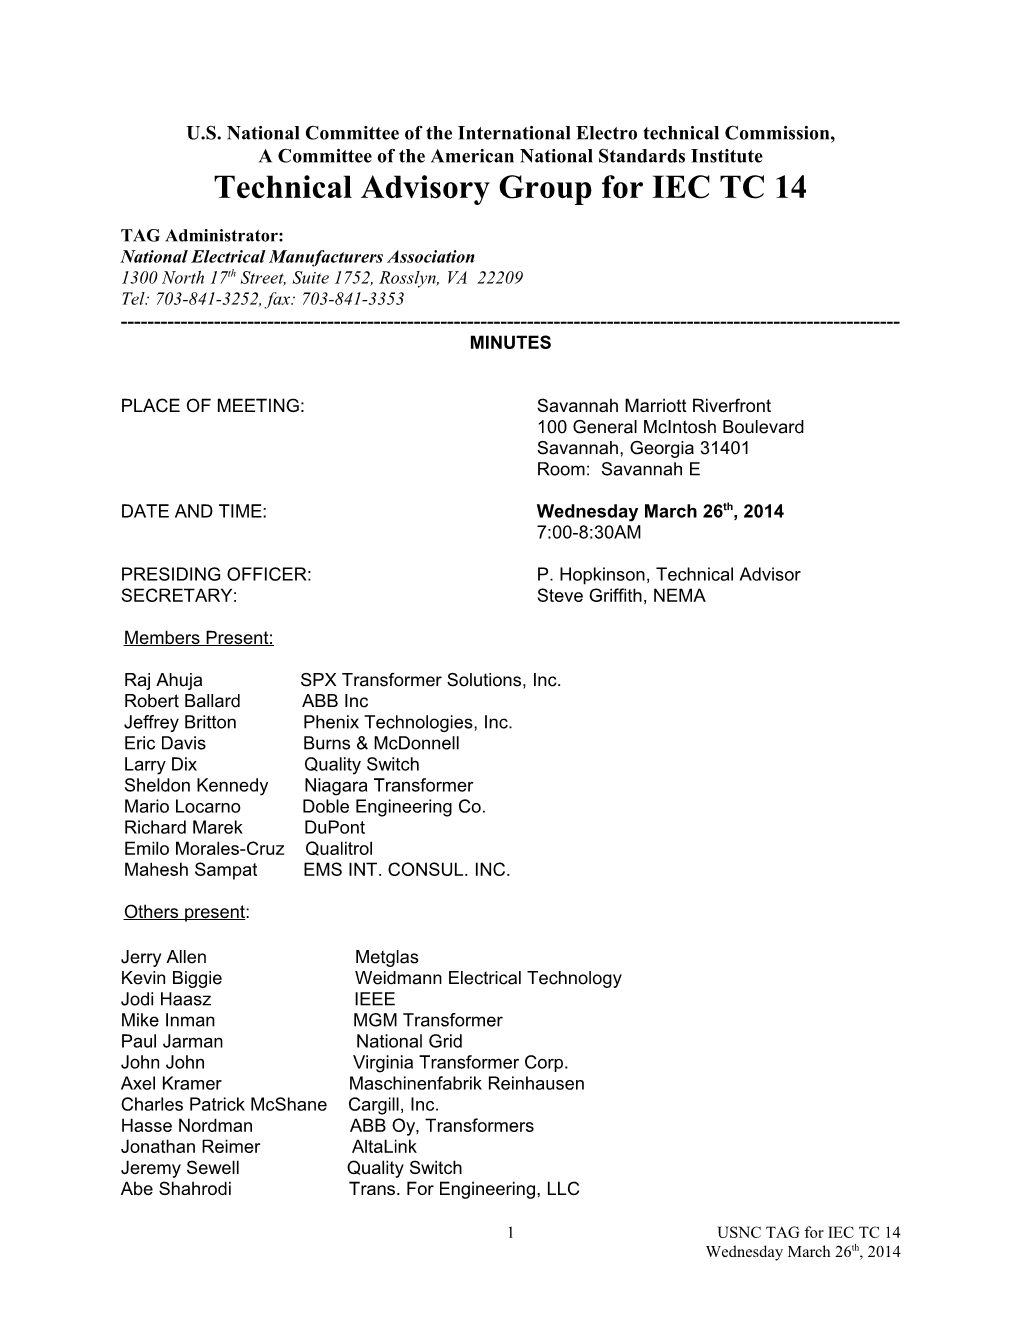 U.S. National Committee of the International Electro Technical Commission